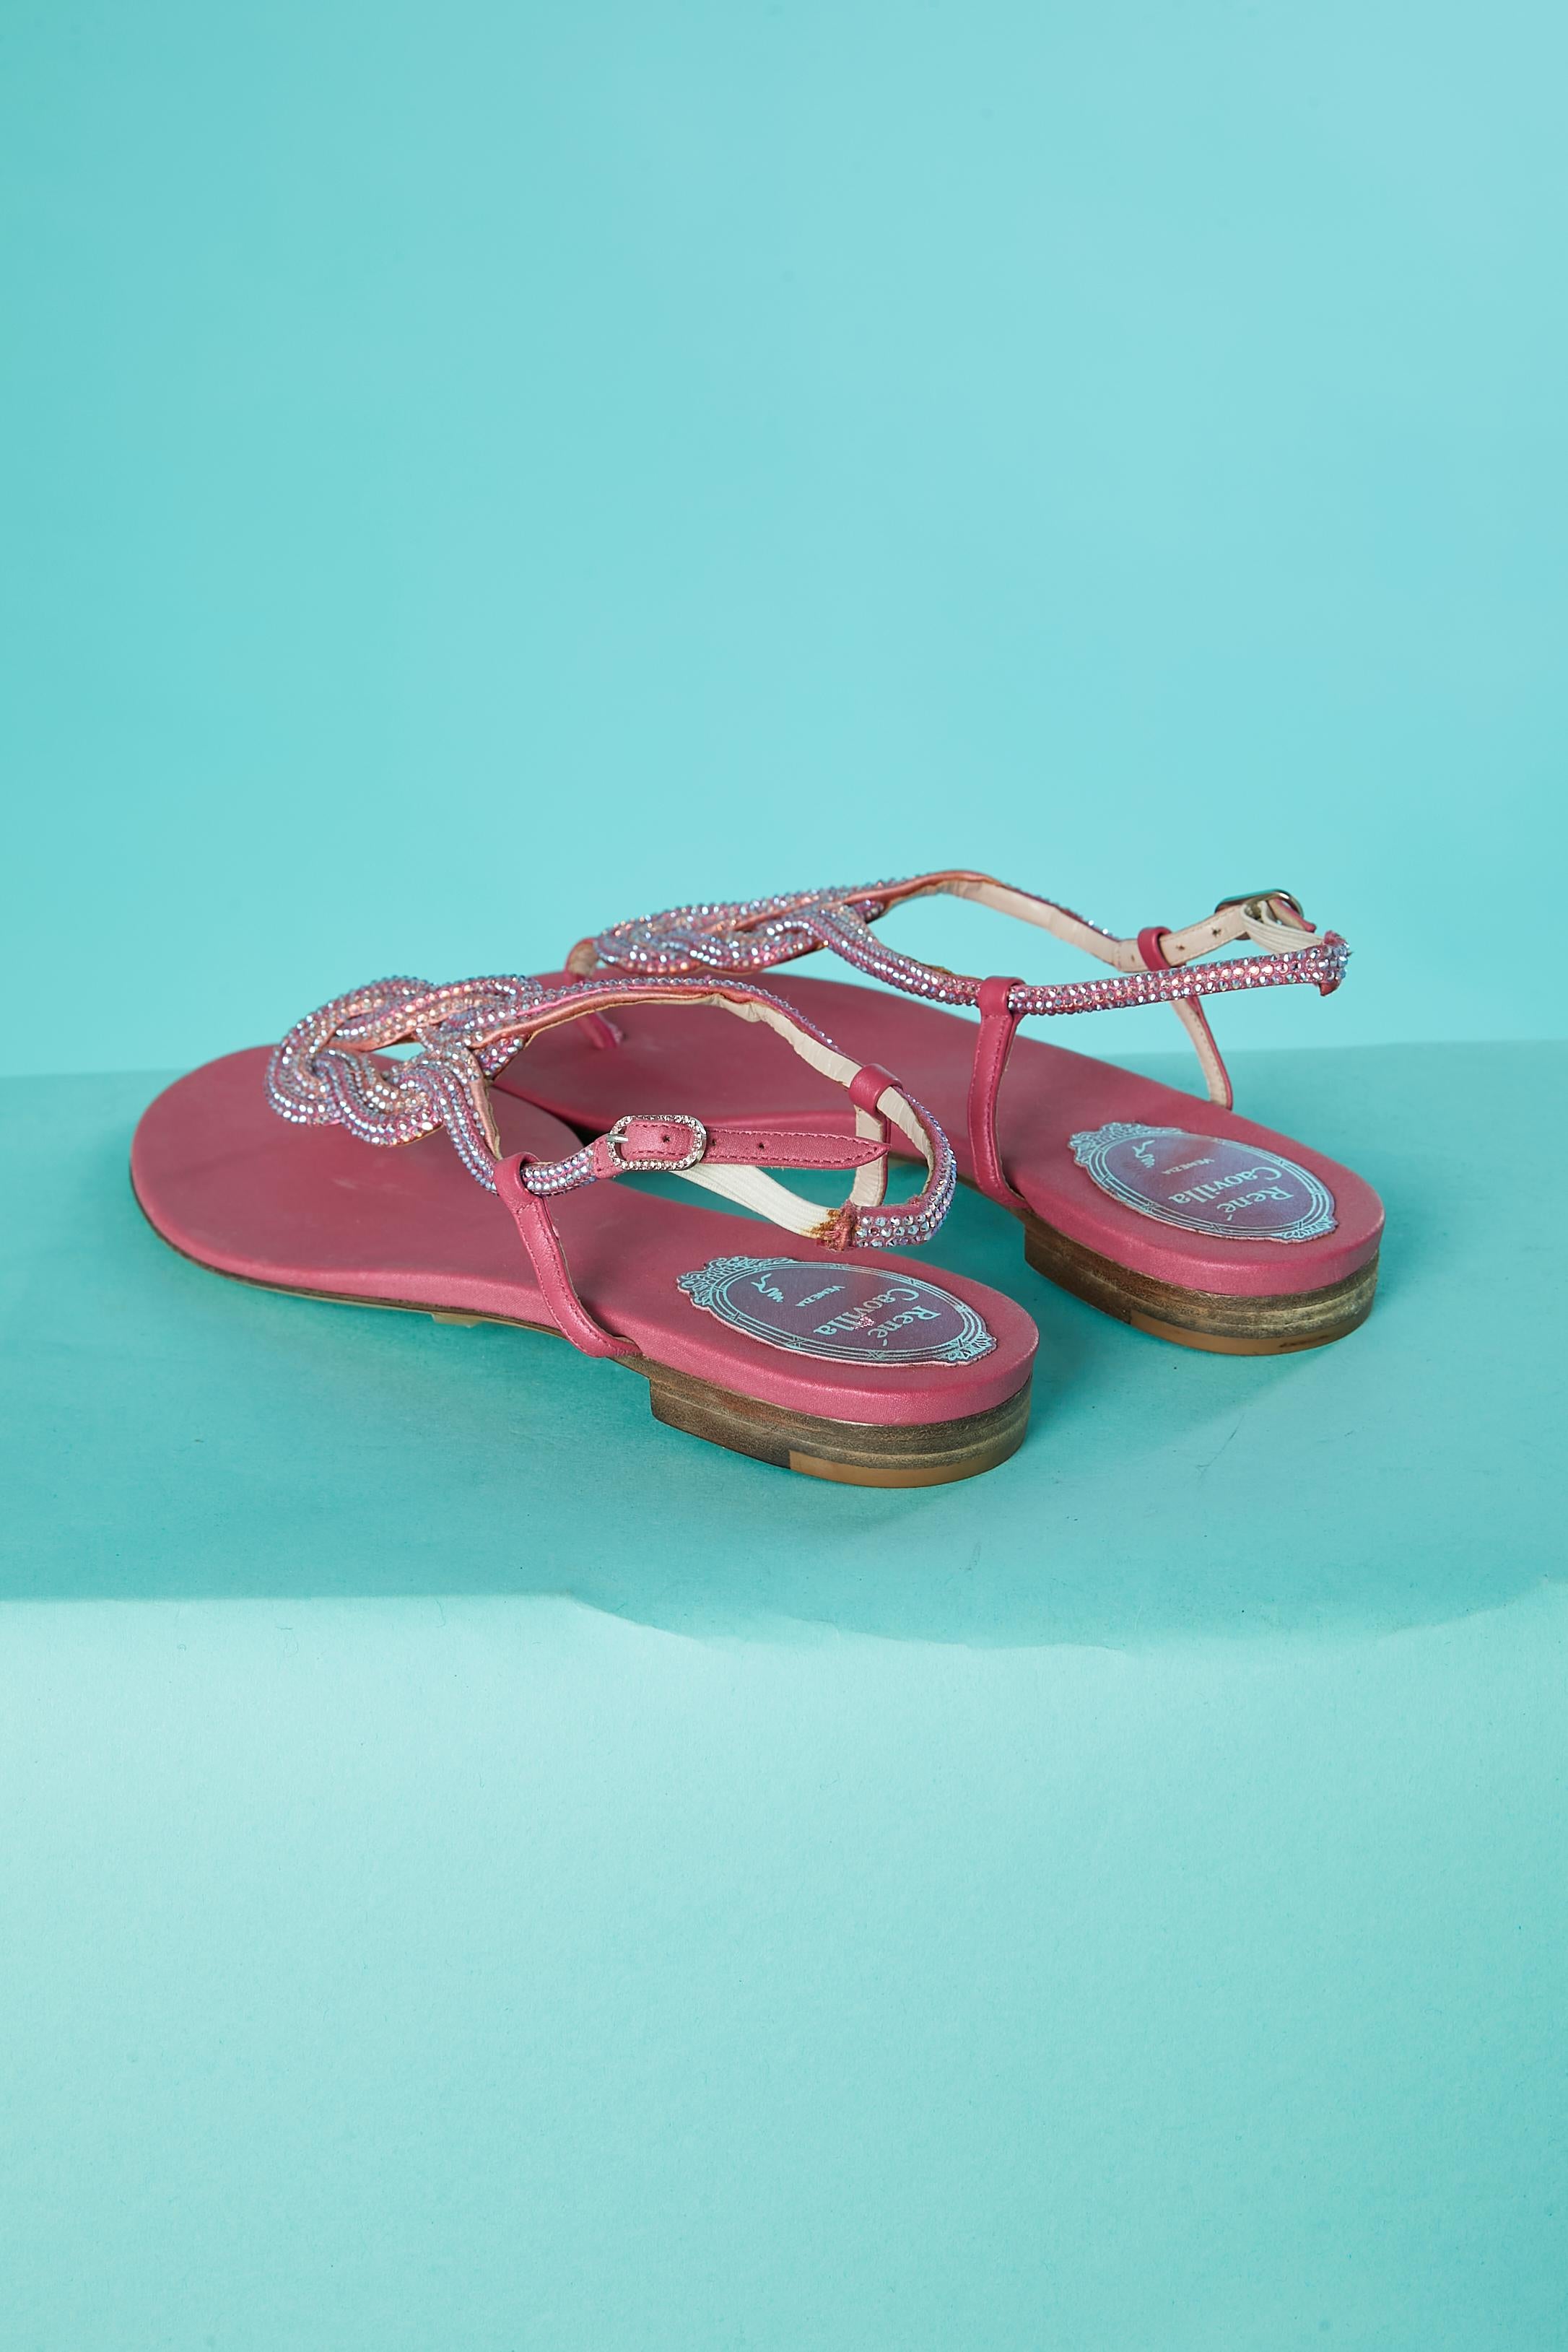 Flat evening sandals in pink satin and rhinestone René Caovilla  In Excellent Condition For Sale In Saint-Ouen-Sur-Seine, FR